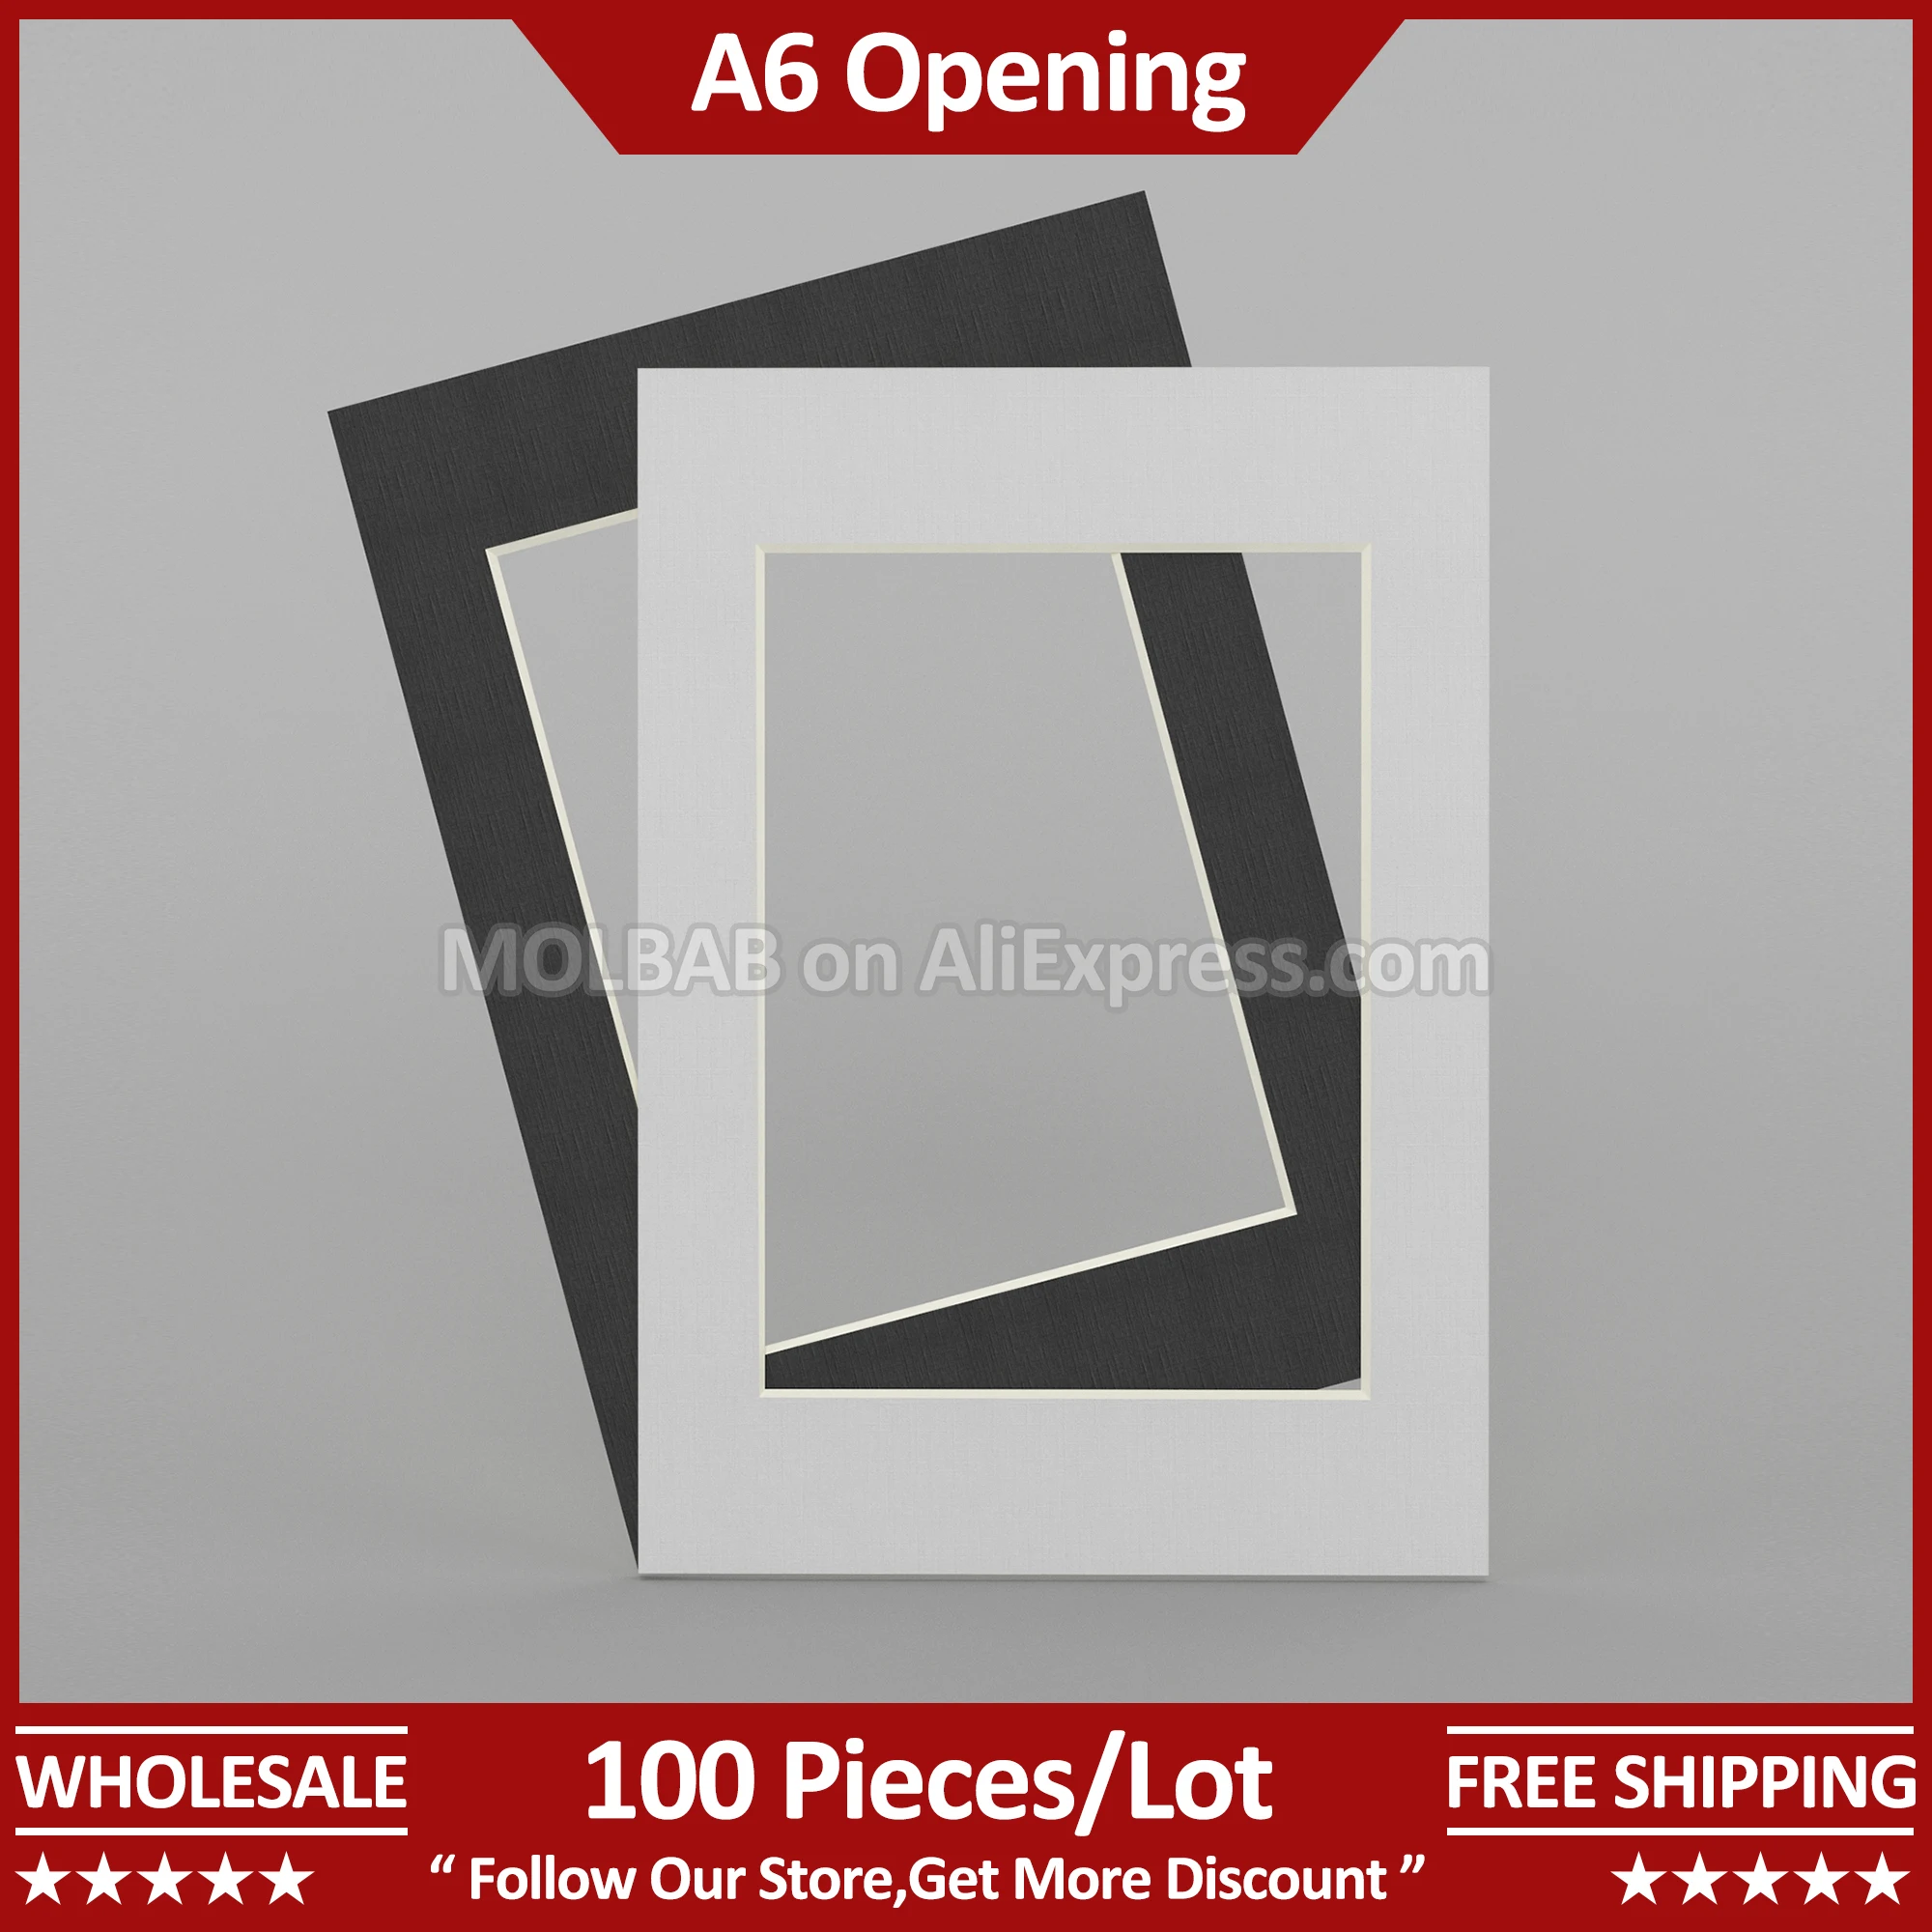 

A5 Photo Mat A6 Opening White/Black Paperboard Picture Passe-partout Frame Mounting Decoration Wholesale 100 Pieces Per Lot